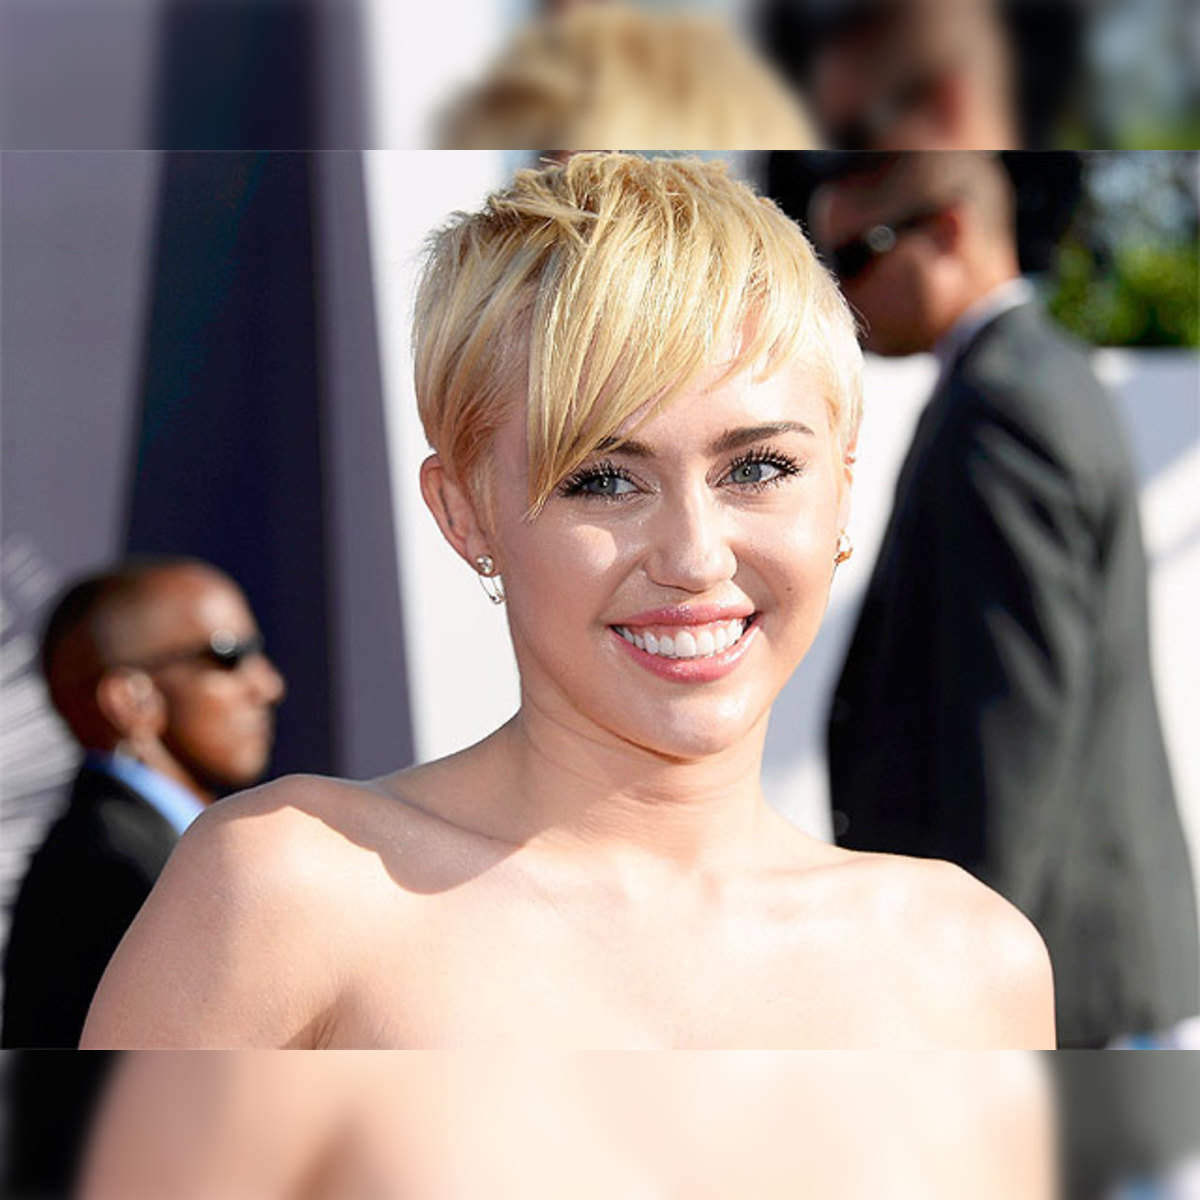 chika nnanna recommends miley cyrus xxx movies pic